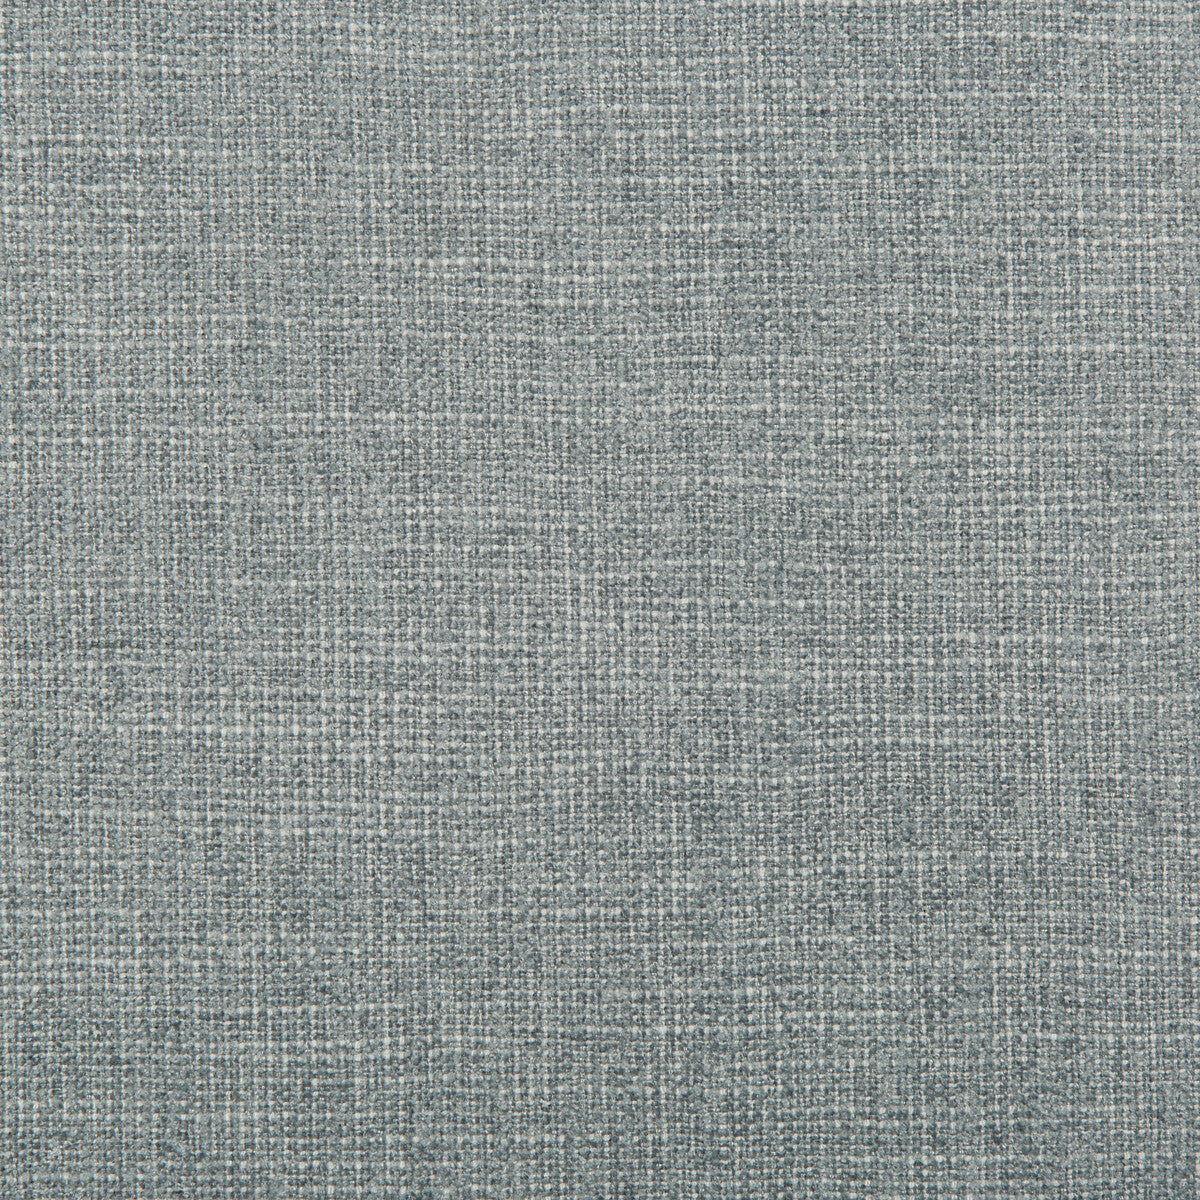 Adaptable fabric in chambray color - pattern 35397.15.0 - by Kravet Design in the Nate Berkus Well-Traveled collection